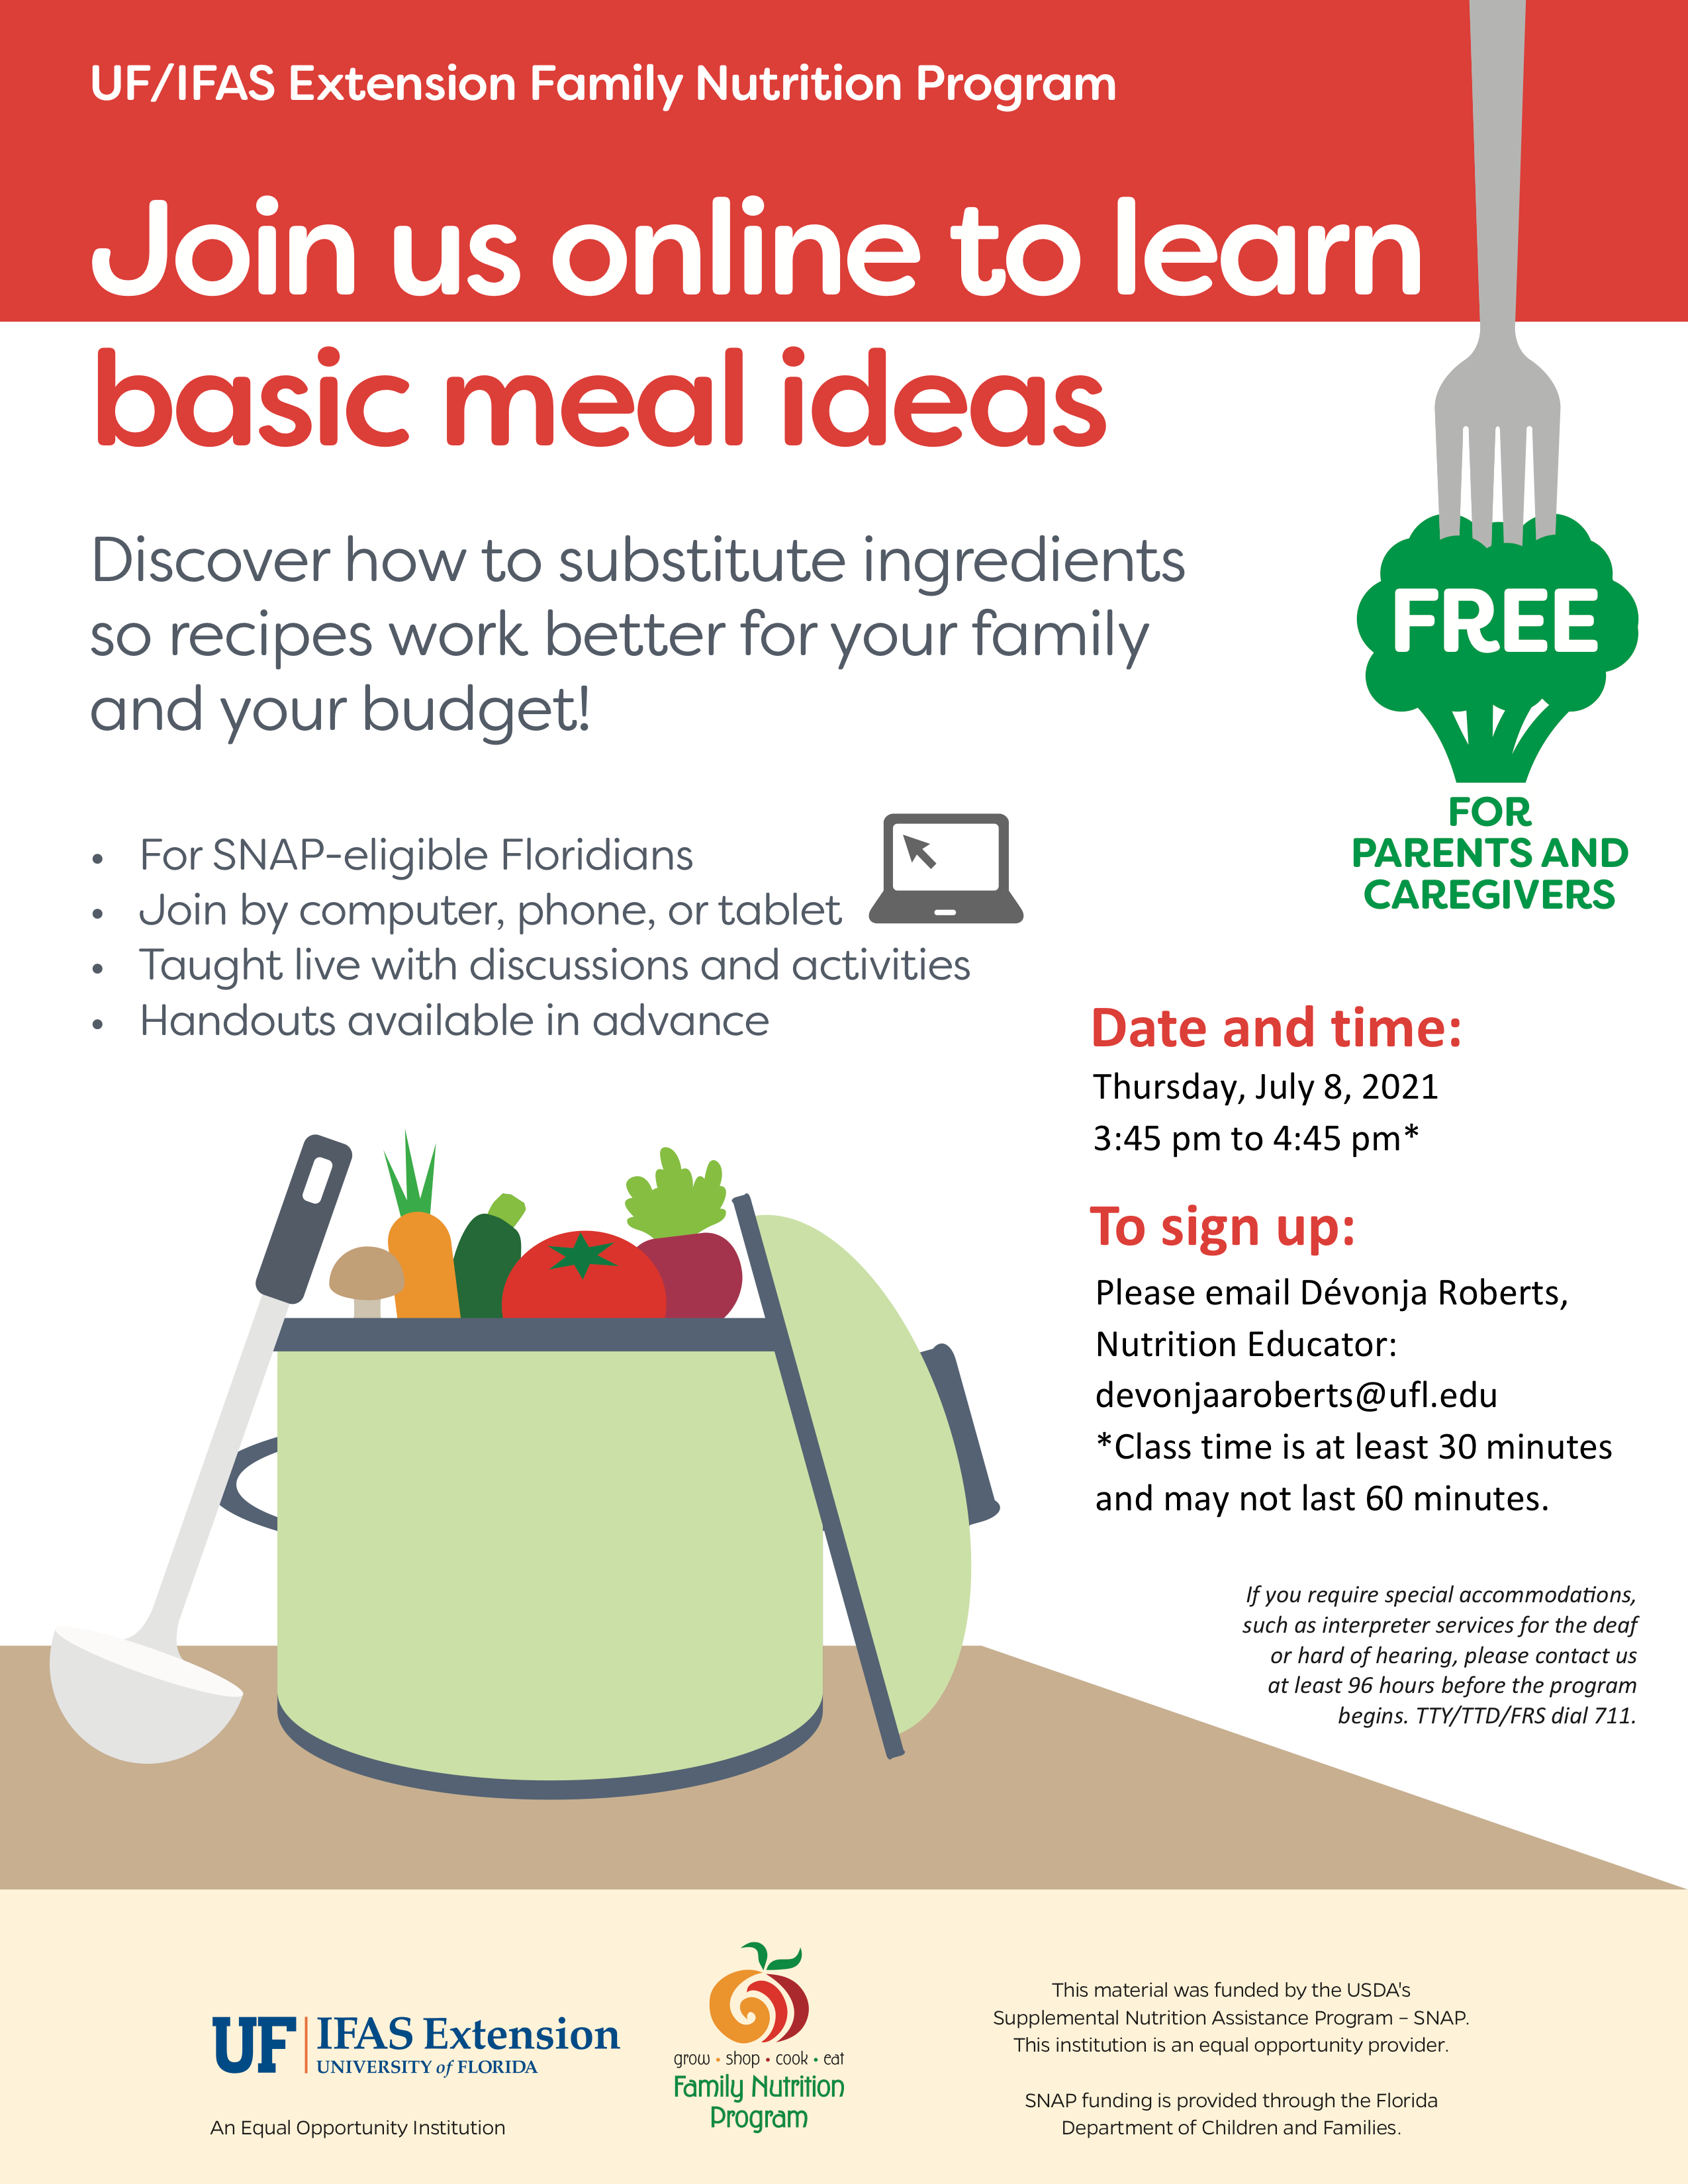 A flyer for a free online session to learn basic meal ideas